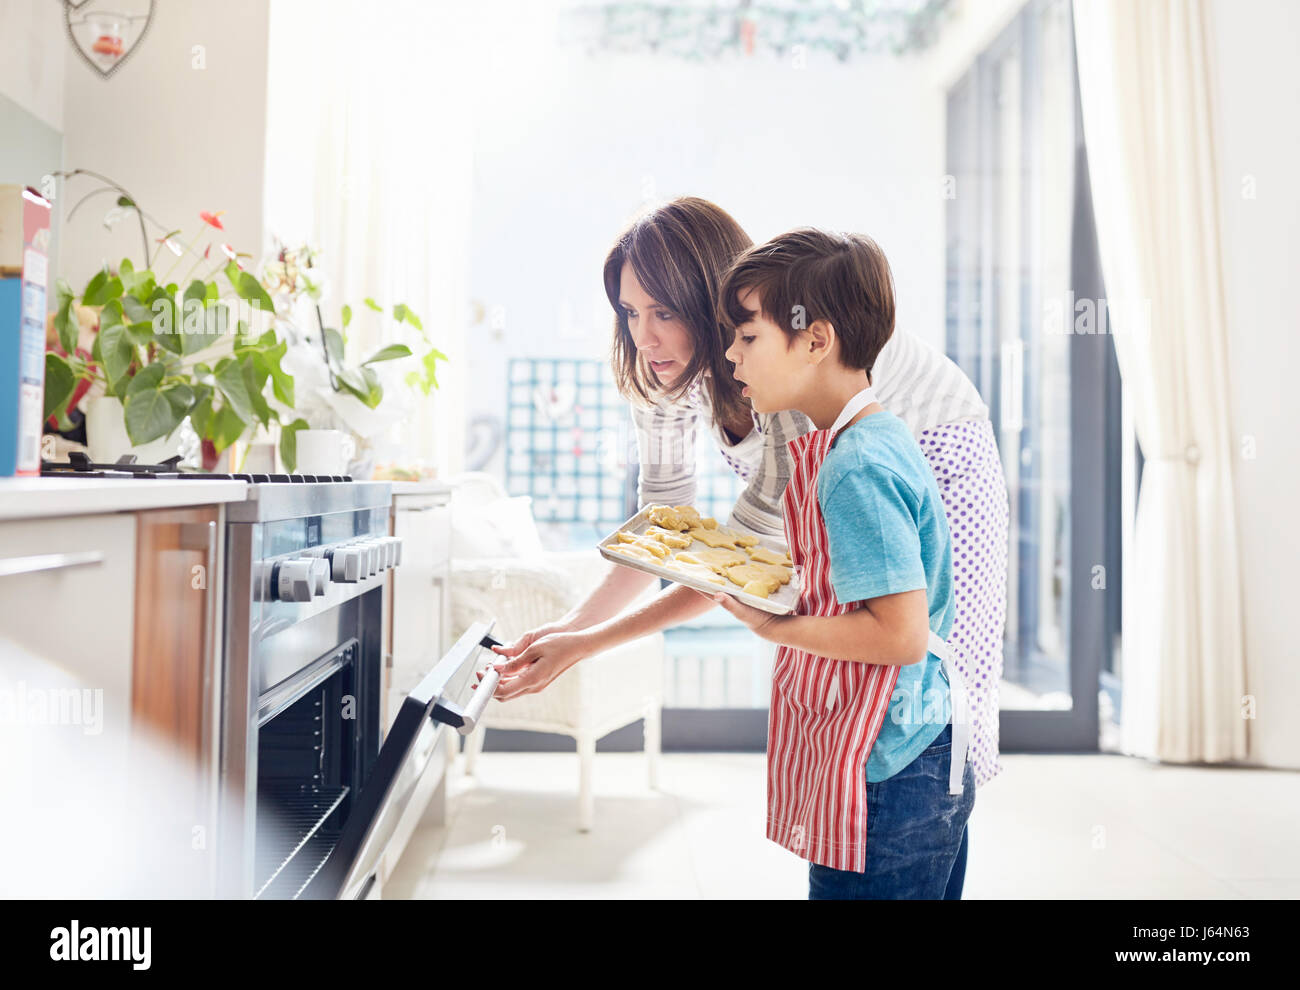 Mother and son baking, placing cookies in oven in kitchen Stock Photo